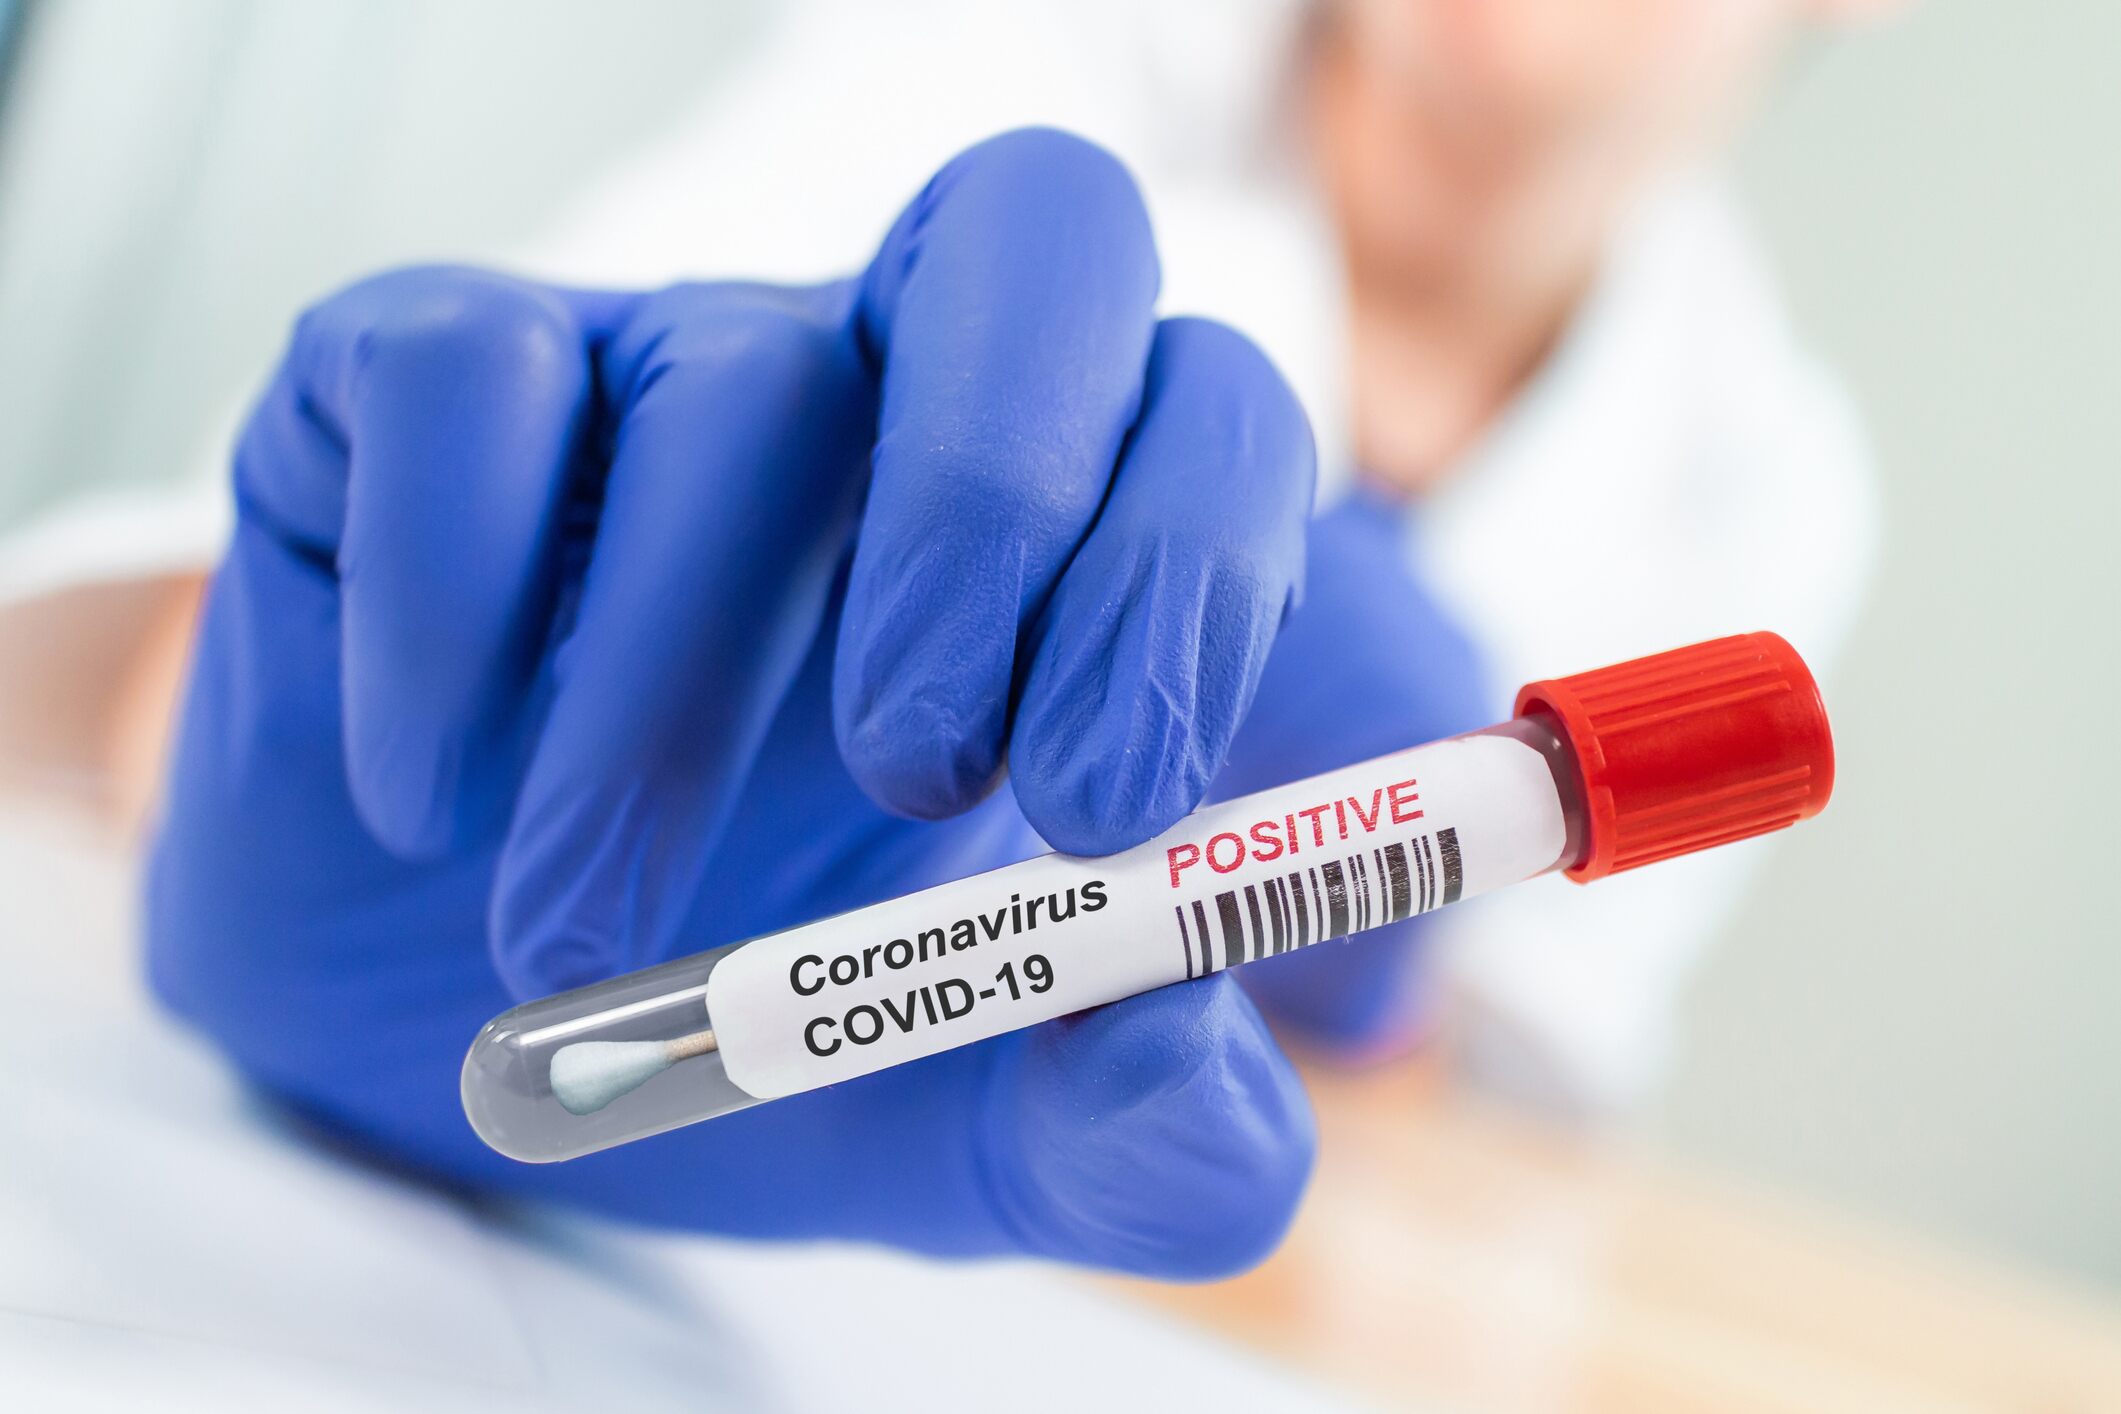 Thousands of North Carolina residents have wrongly reported that they have coronavirus